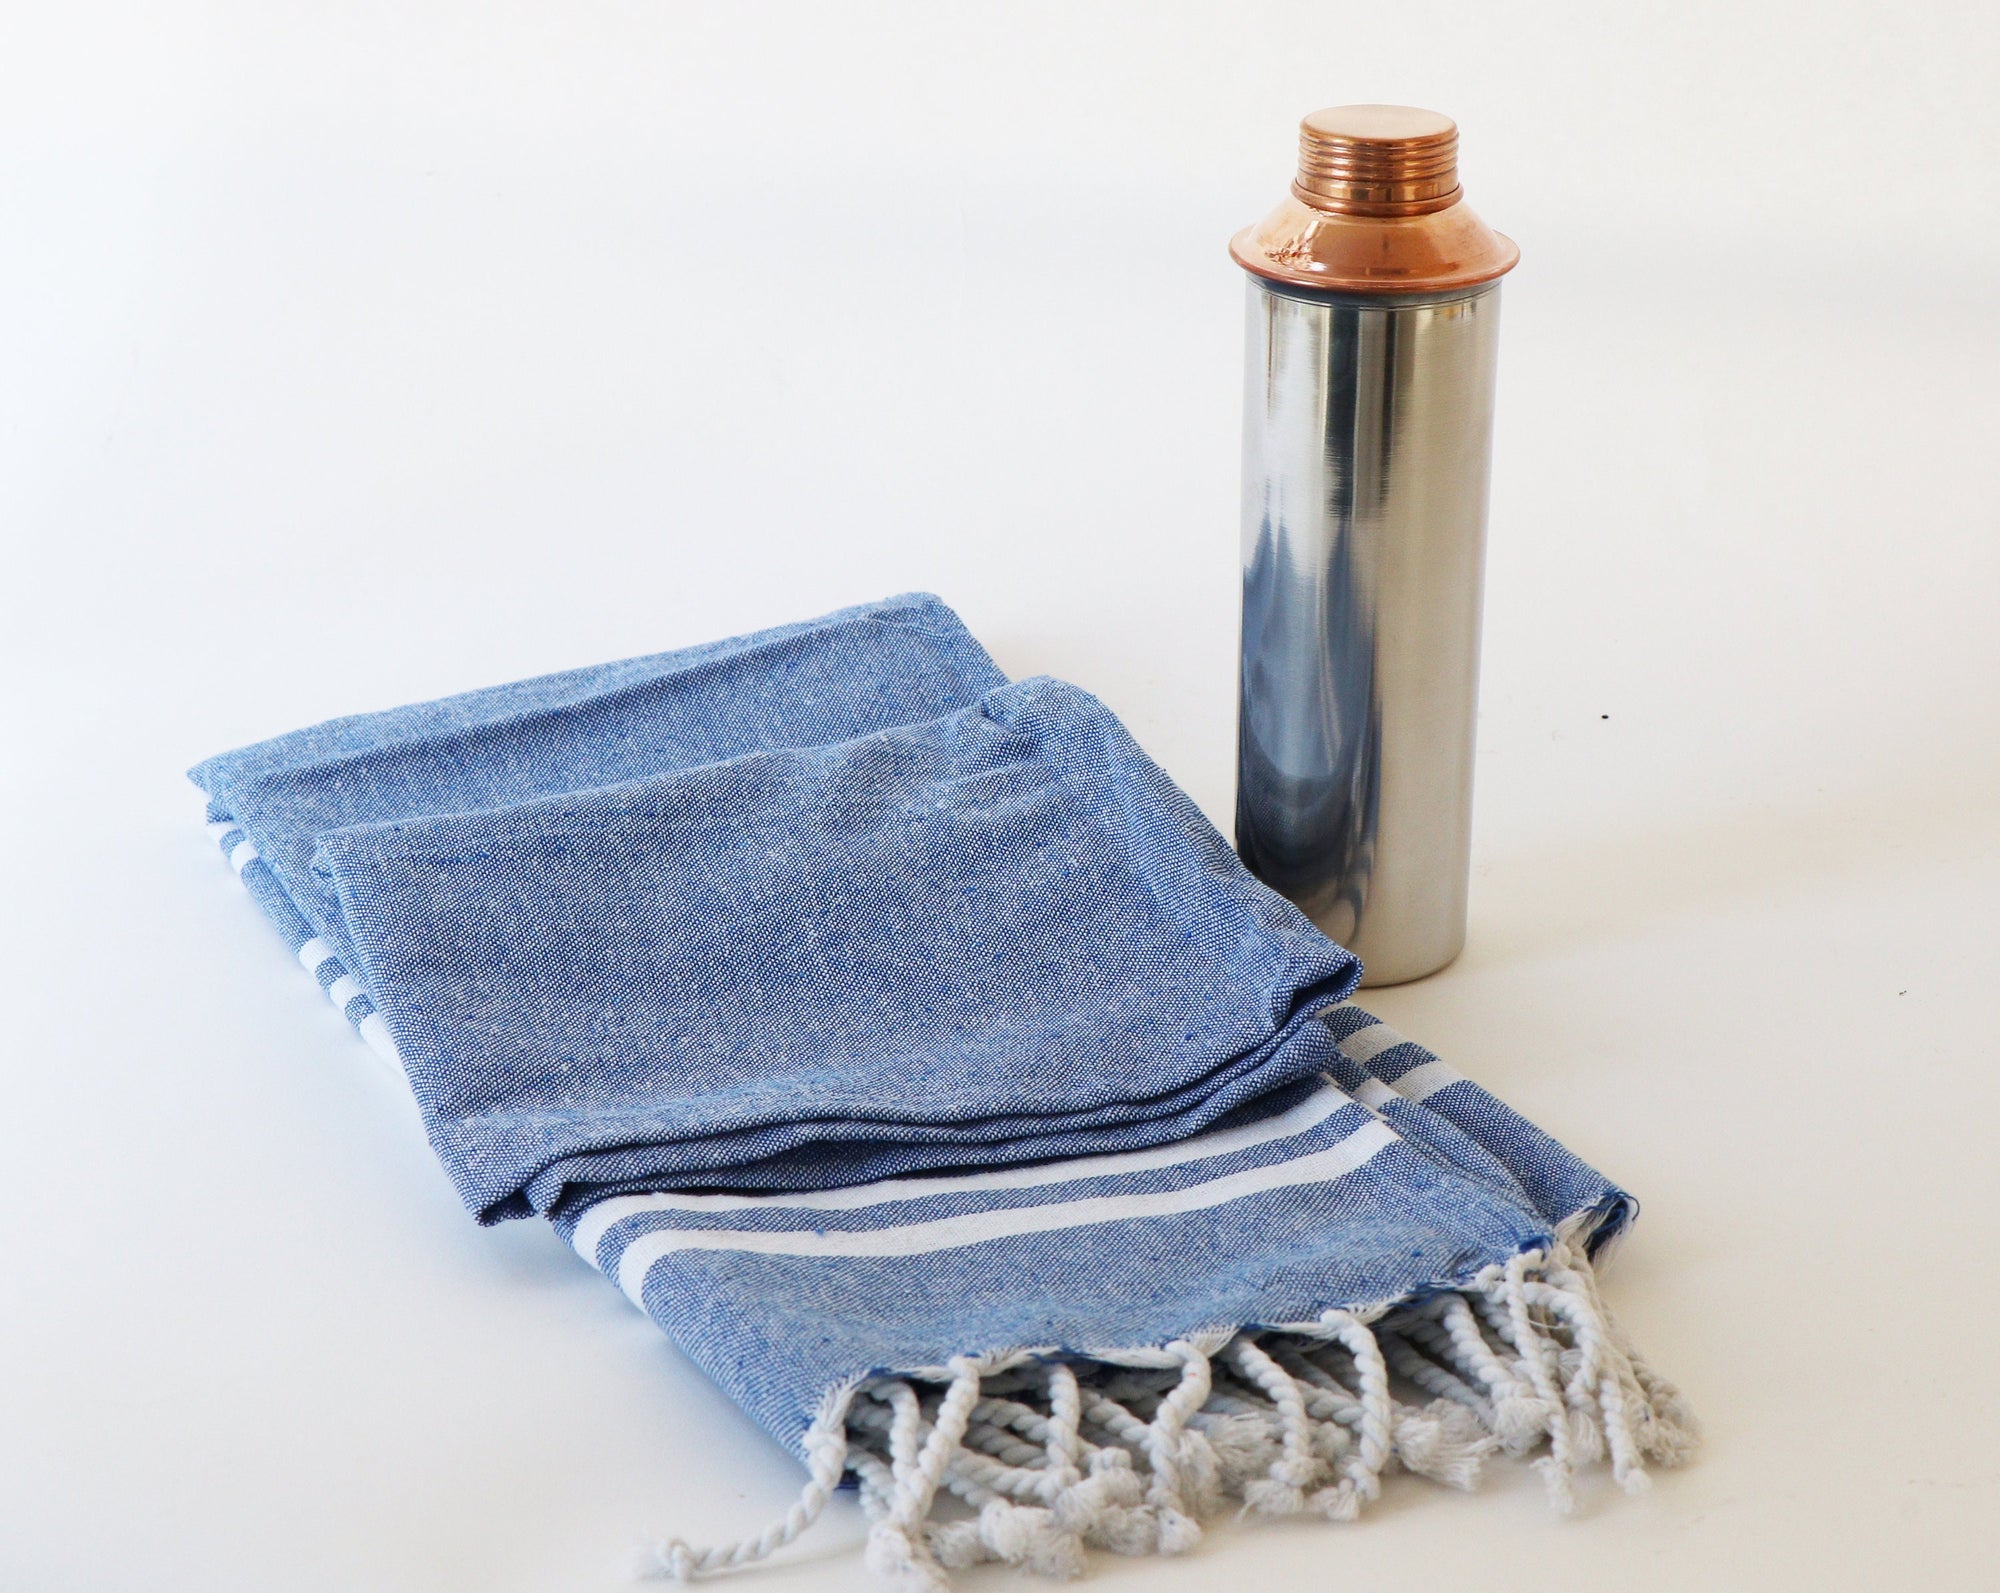 Clearance - Copper Magnetic Water Bottle (Tamra Jal Patra) with a Complimentary Yoga Towel - For Health, Wellness, Yoga